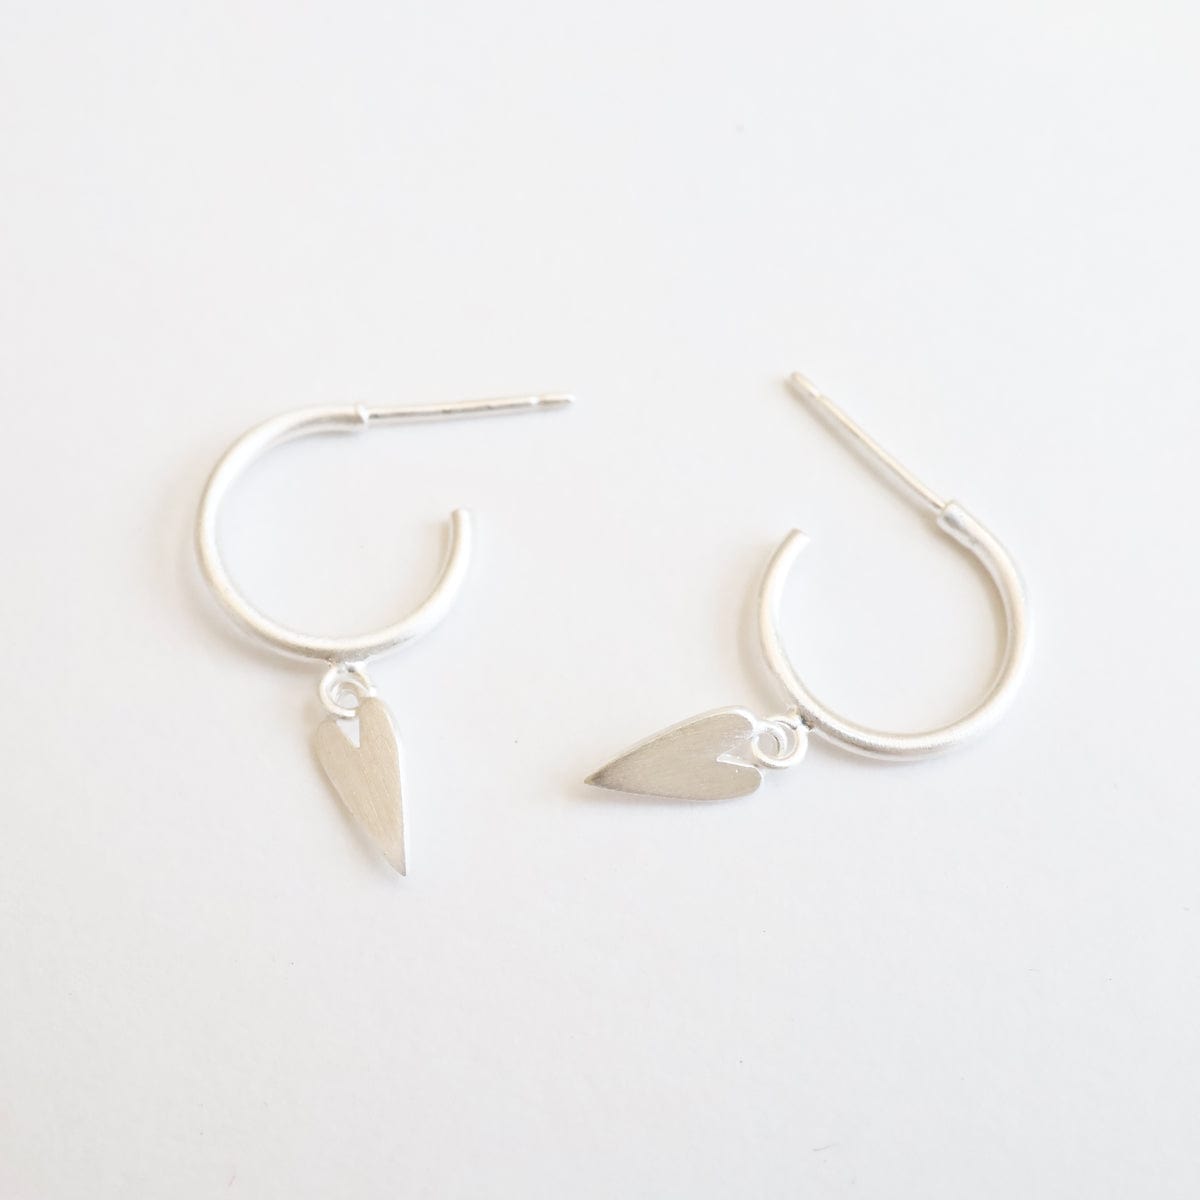 EAR Hoop with Hanging Long Heart - Brushed Sterling Silver